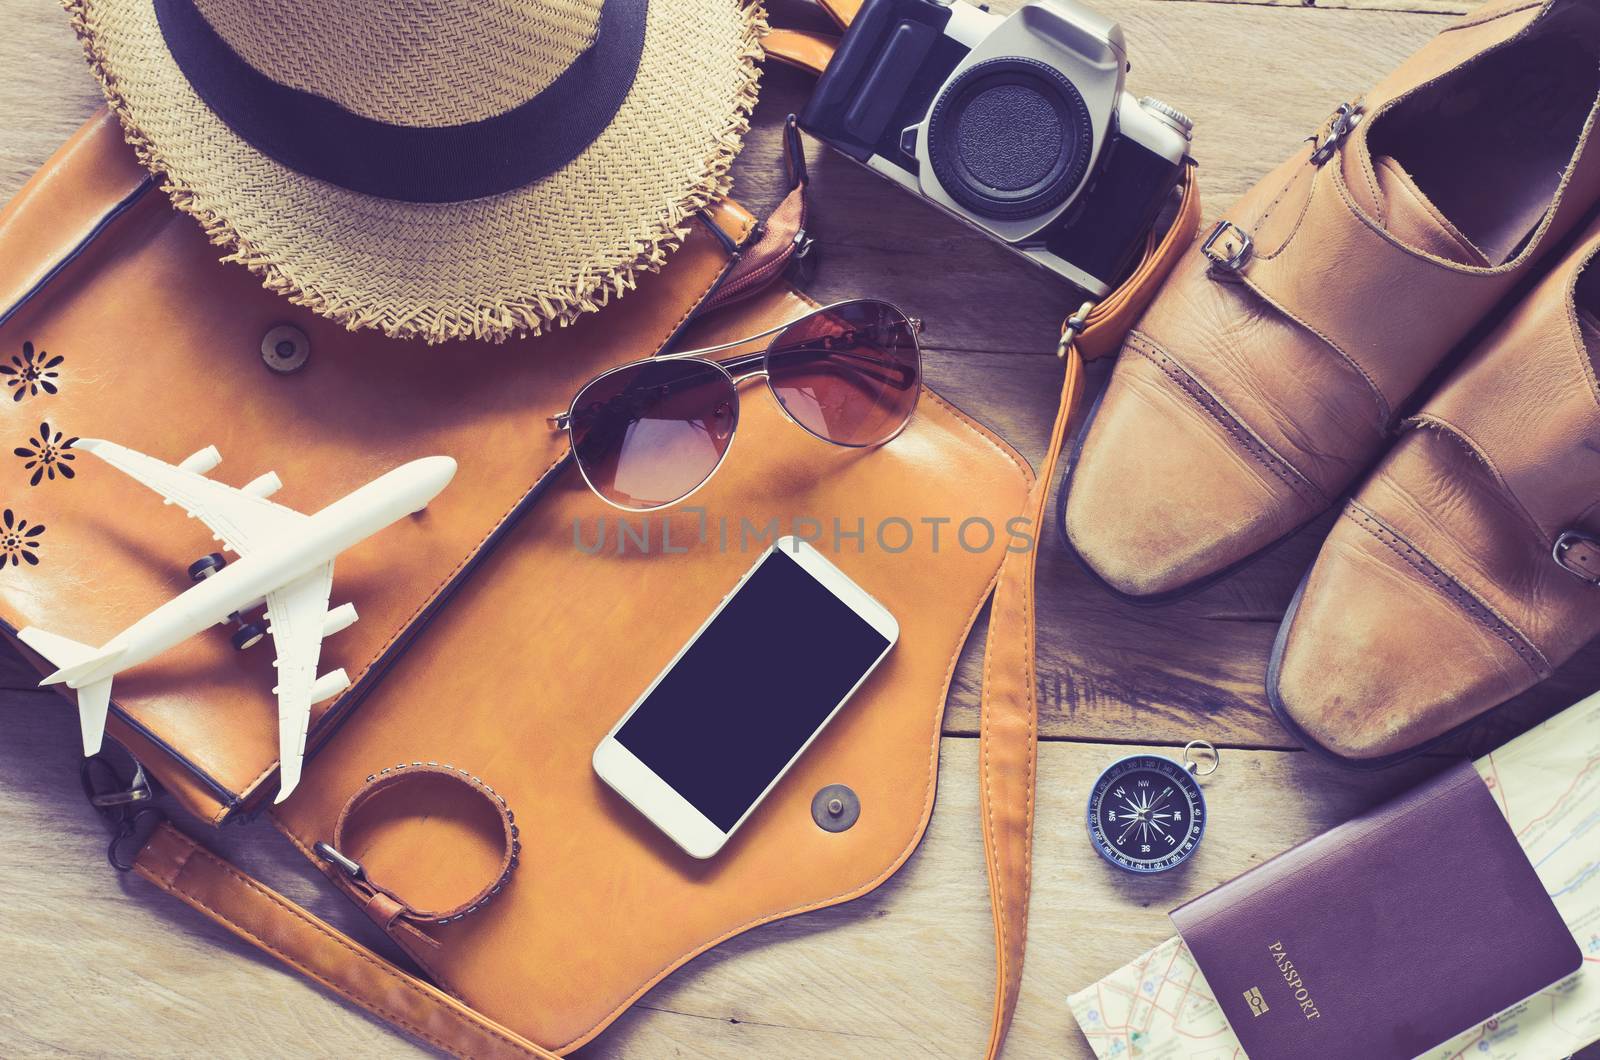 Travel accessories on wooden floor ready for travel